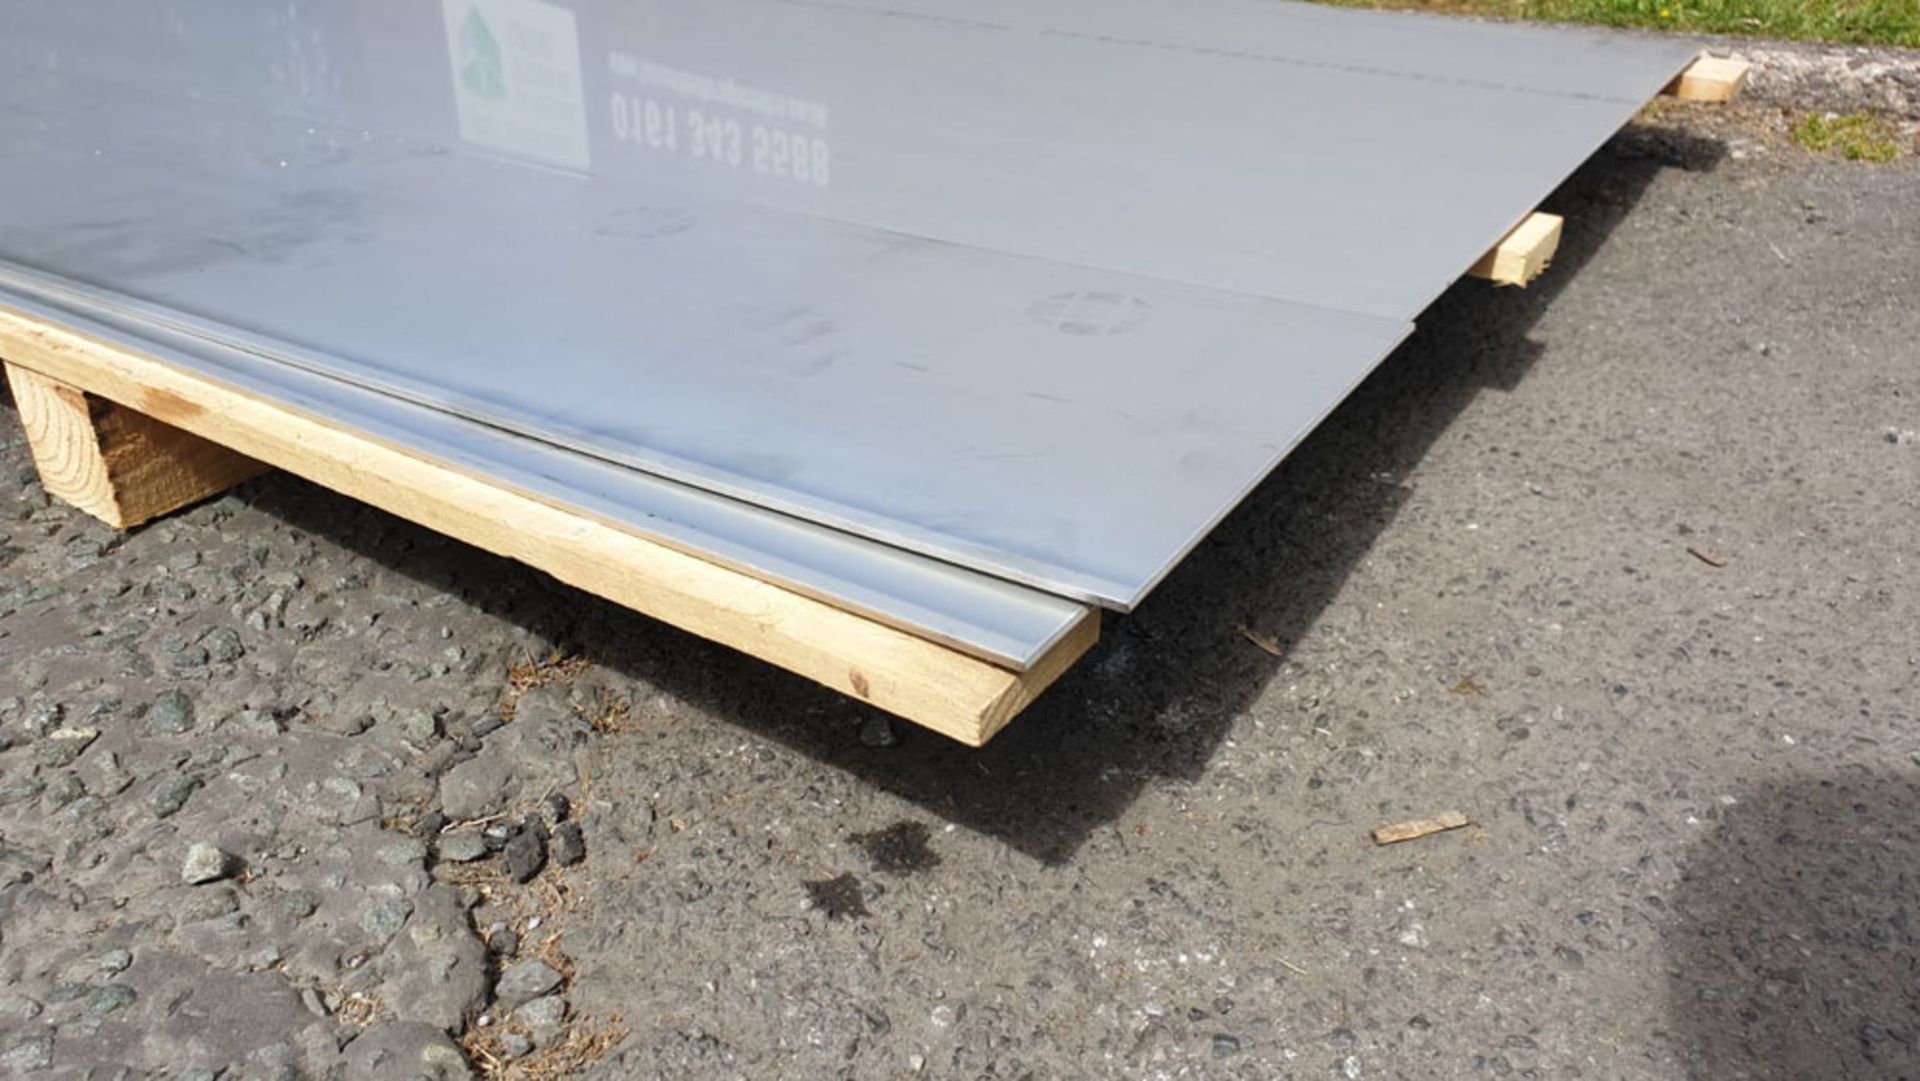 Stainless Steel Sheets. Type 304L. 1 x 2000mm x 1000mm x 4mm Thickness. 1 x 2000mm x 260mm x 4mm. - Image 2 of 3